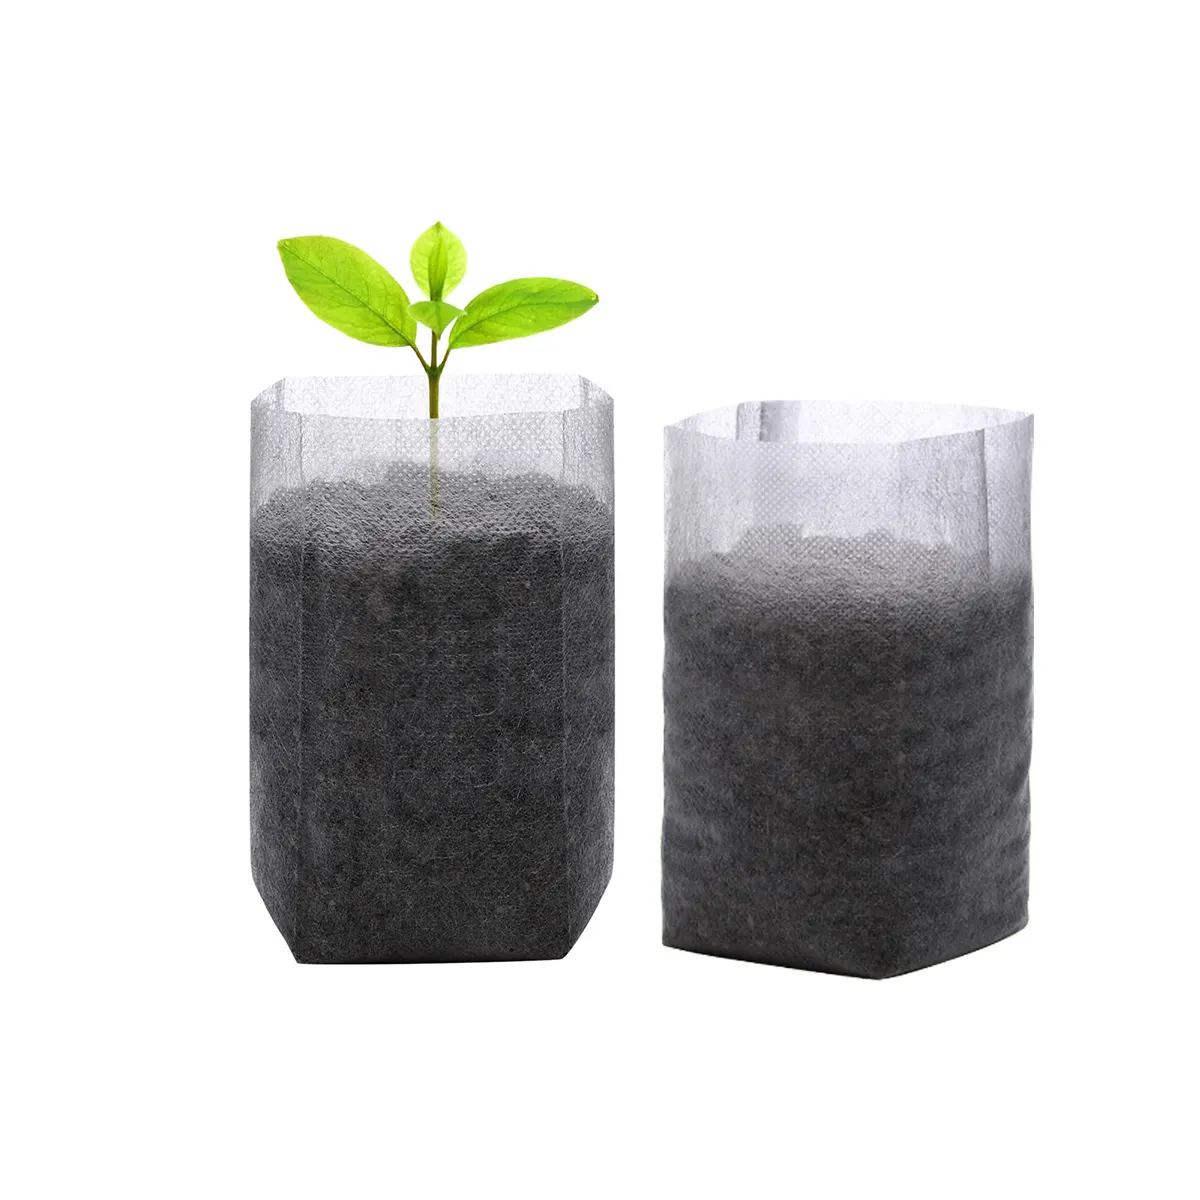 300 pieces non-woven Nursery growing bags 7''x8'' 18x20cm outdoor seedling planting bags for potato seedings